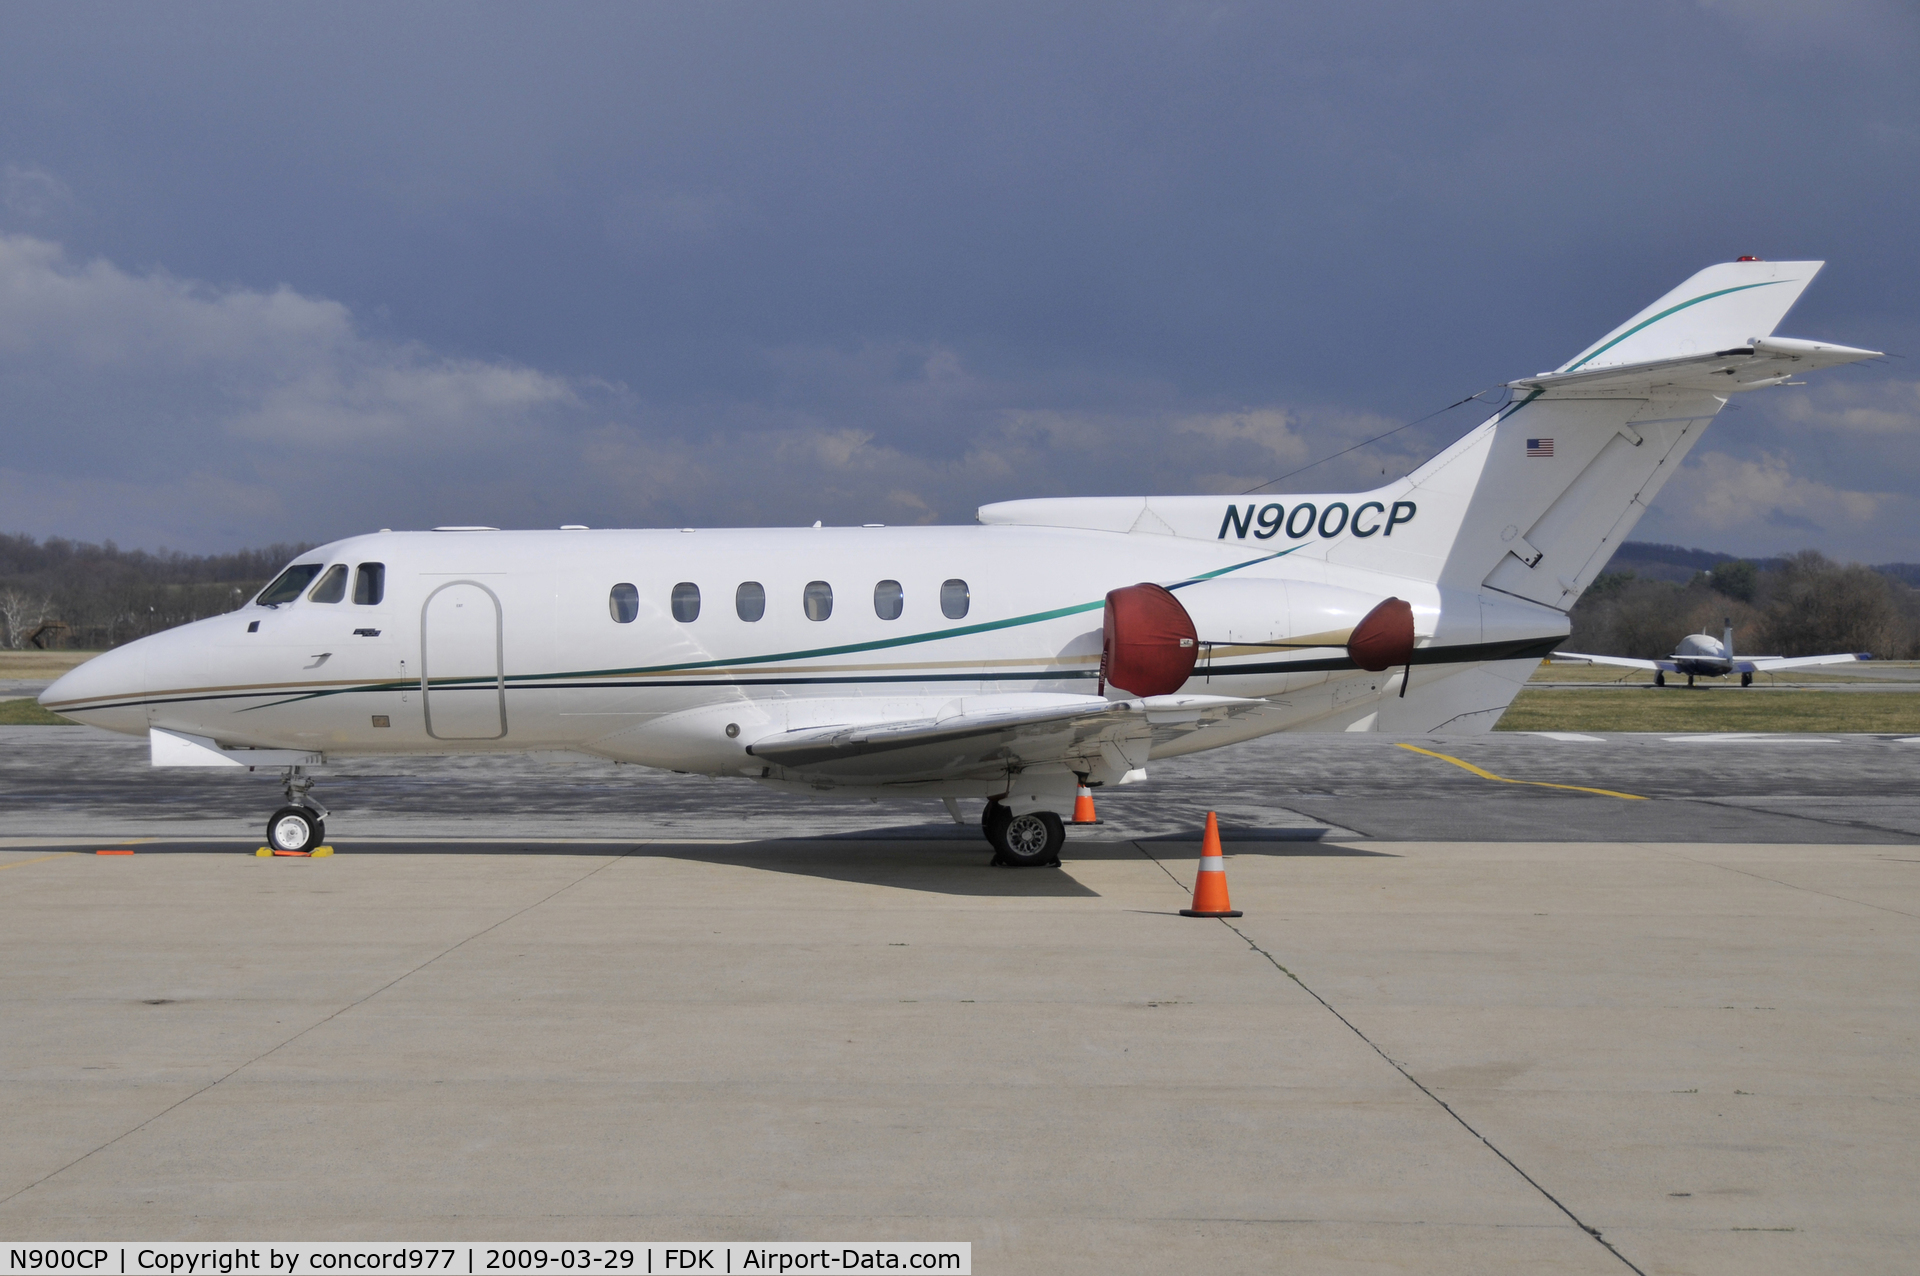 N900CP, 1979 British Aerospace HS.125 Series 700A C/N 257066, A frequent visitor to KFDK